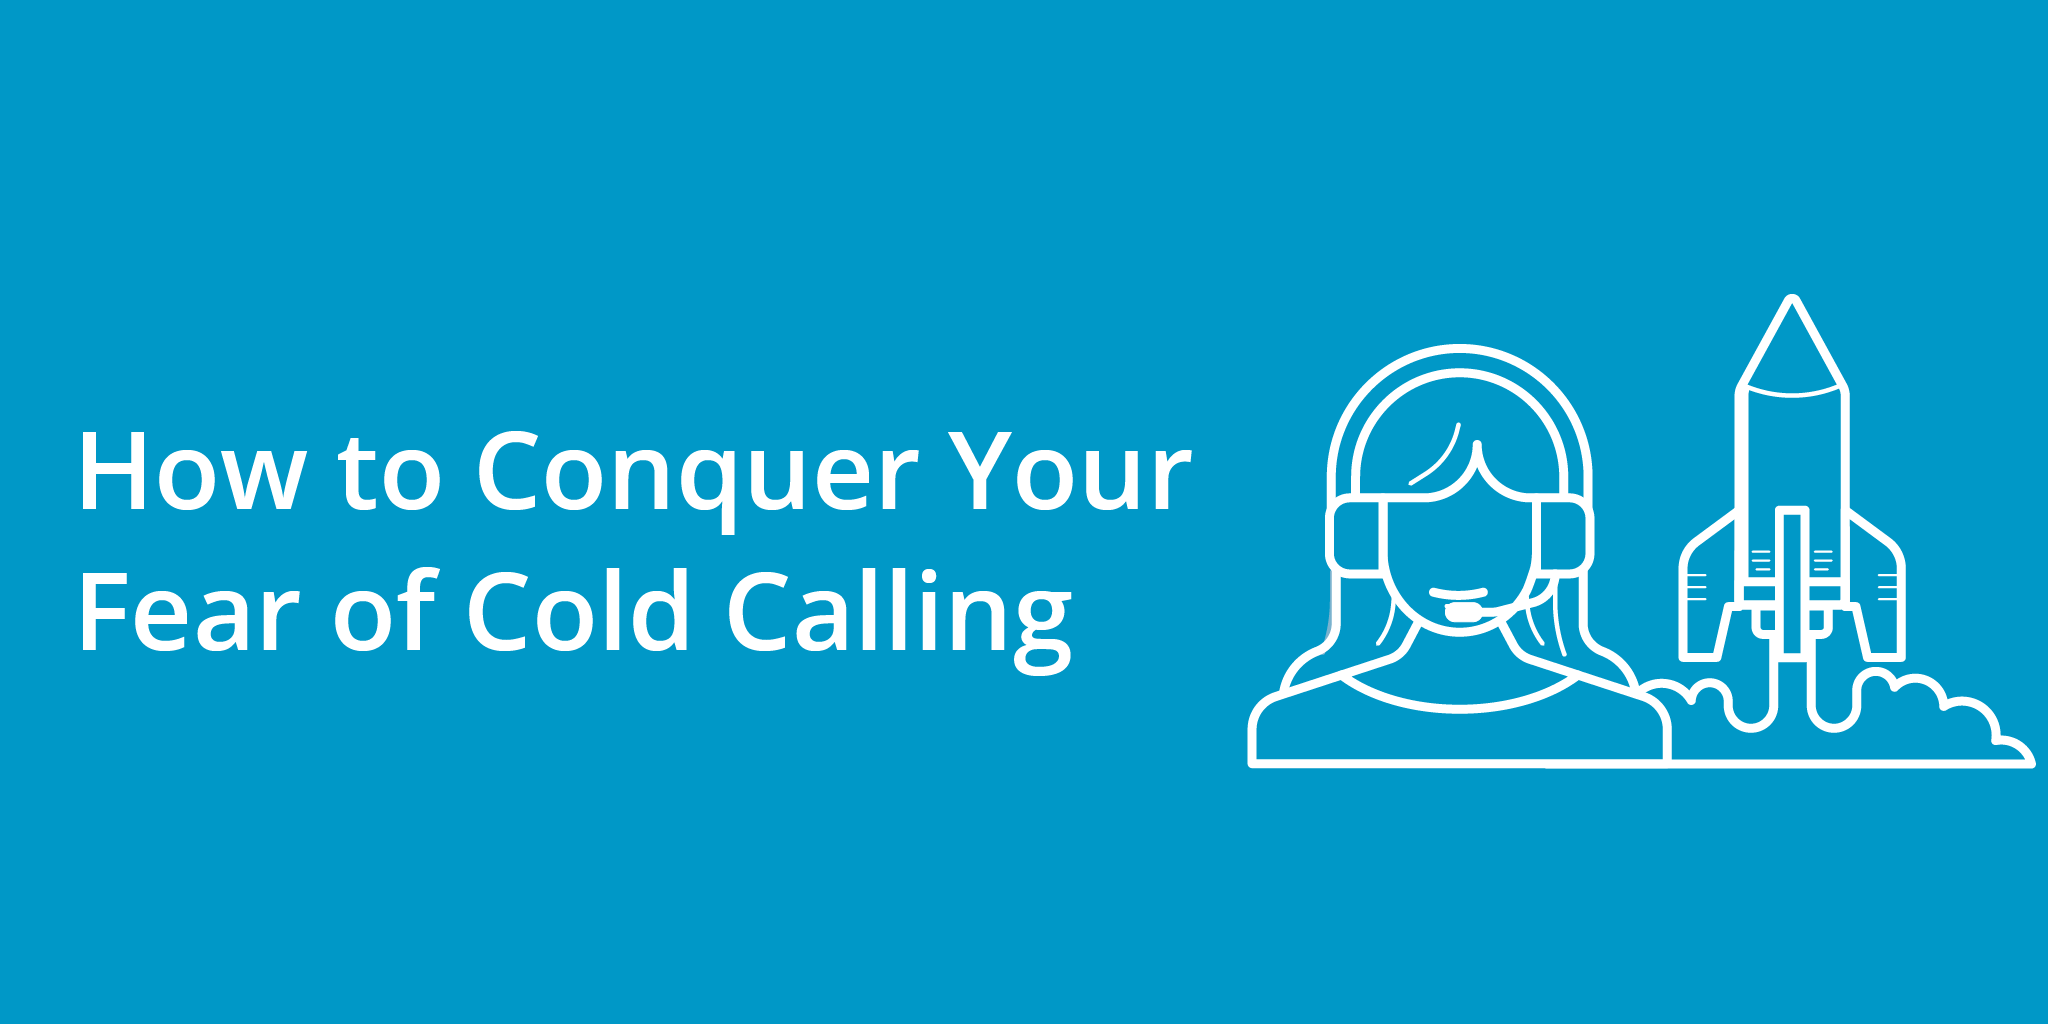 How to Conquer Your Fear of Cold Calling | Telephones for business